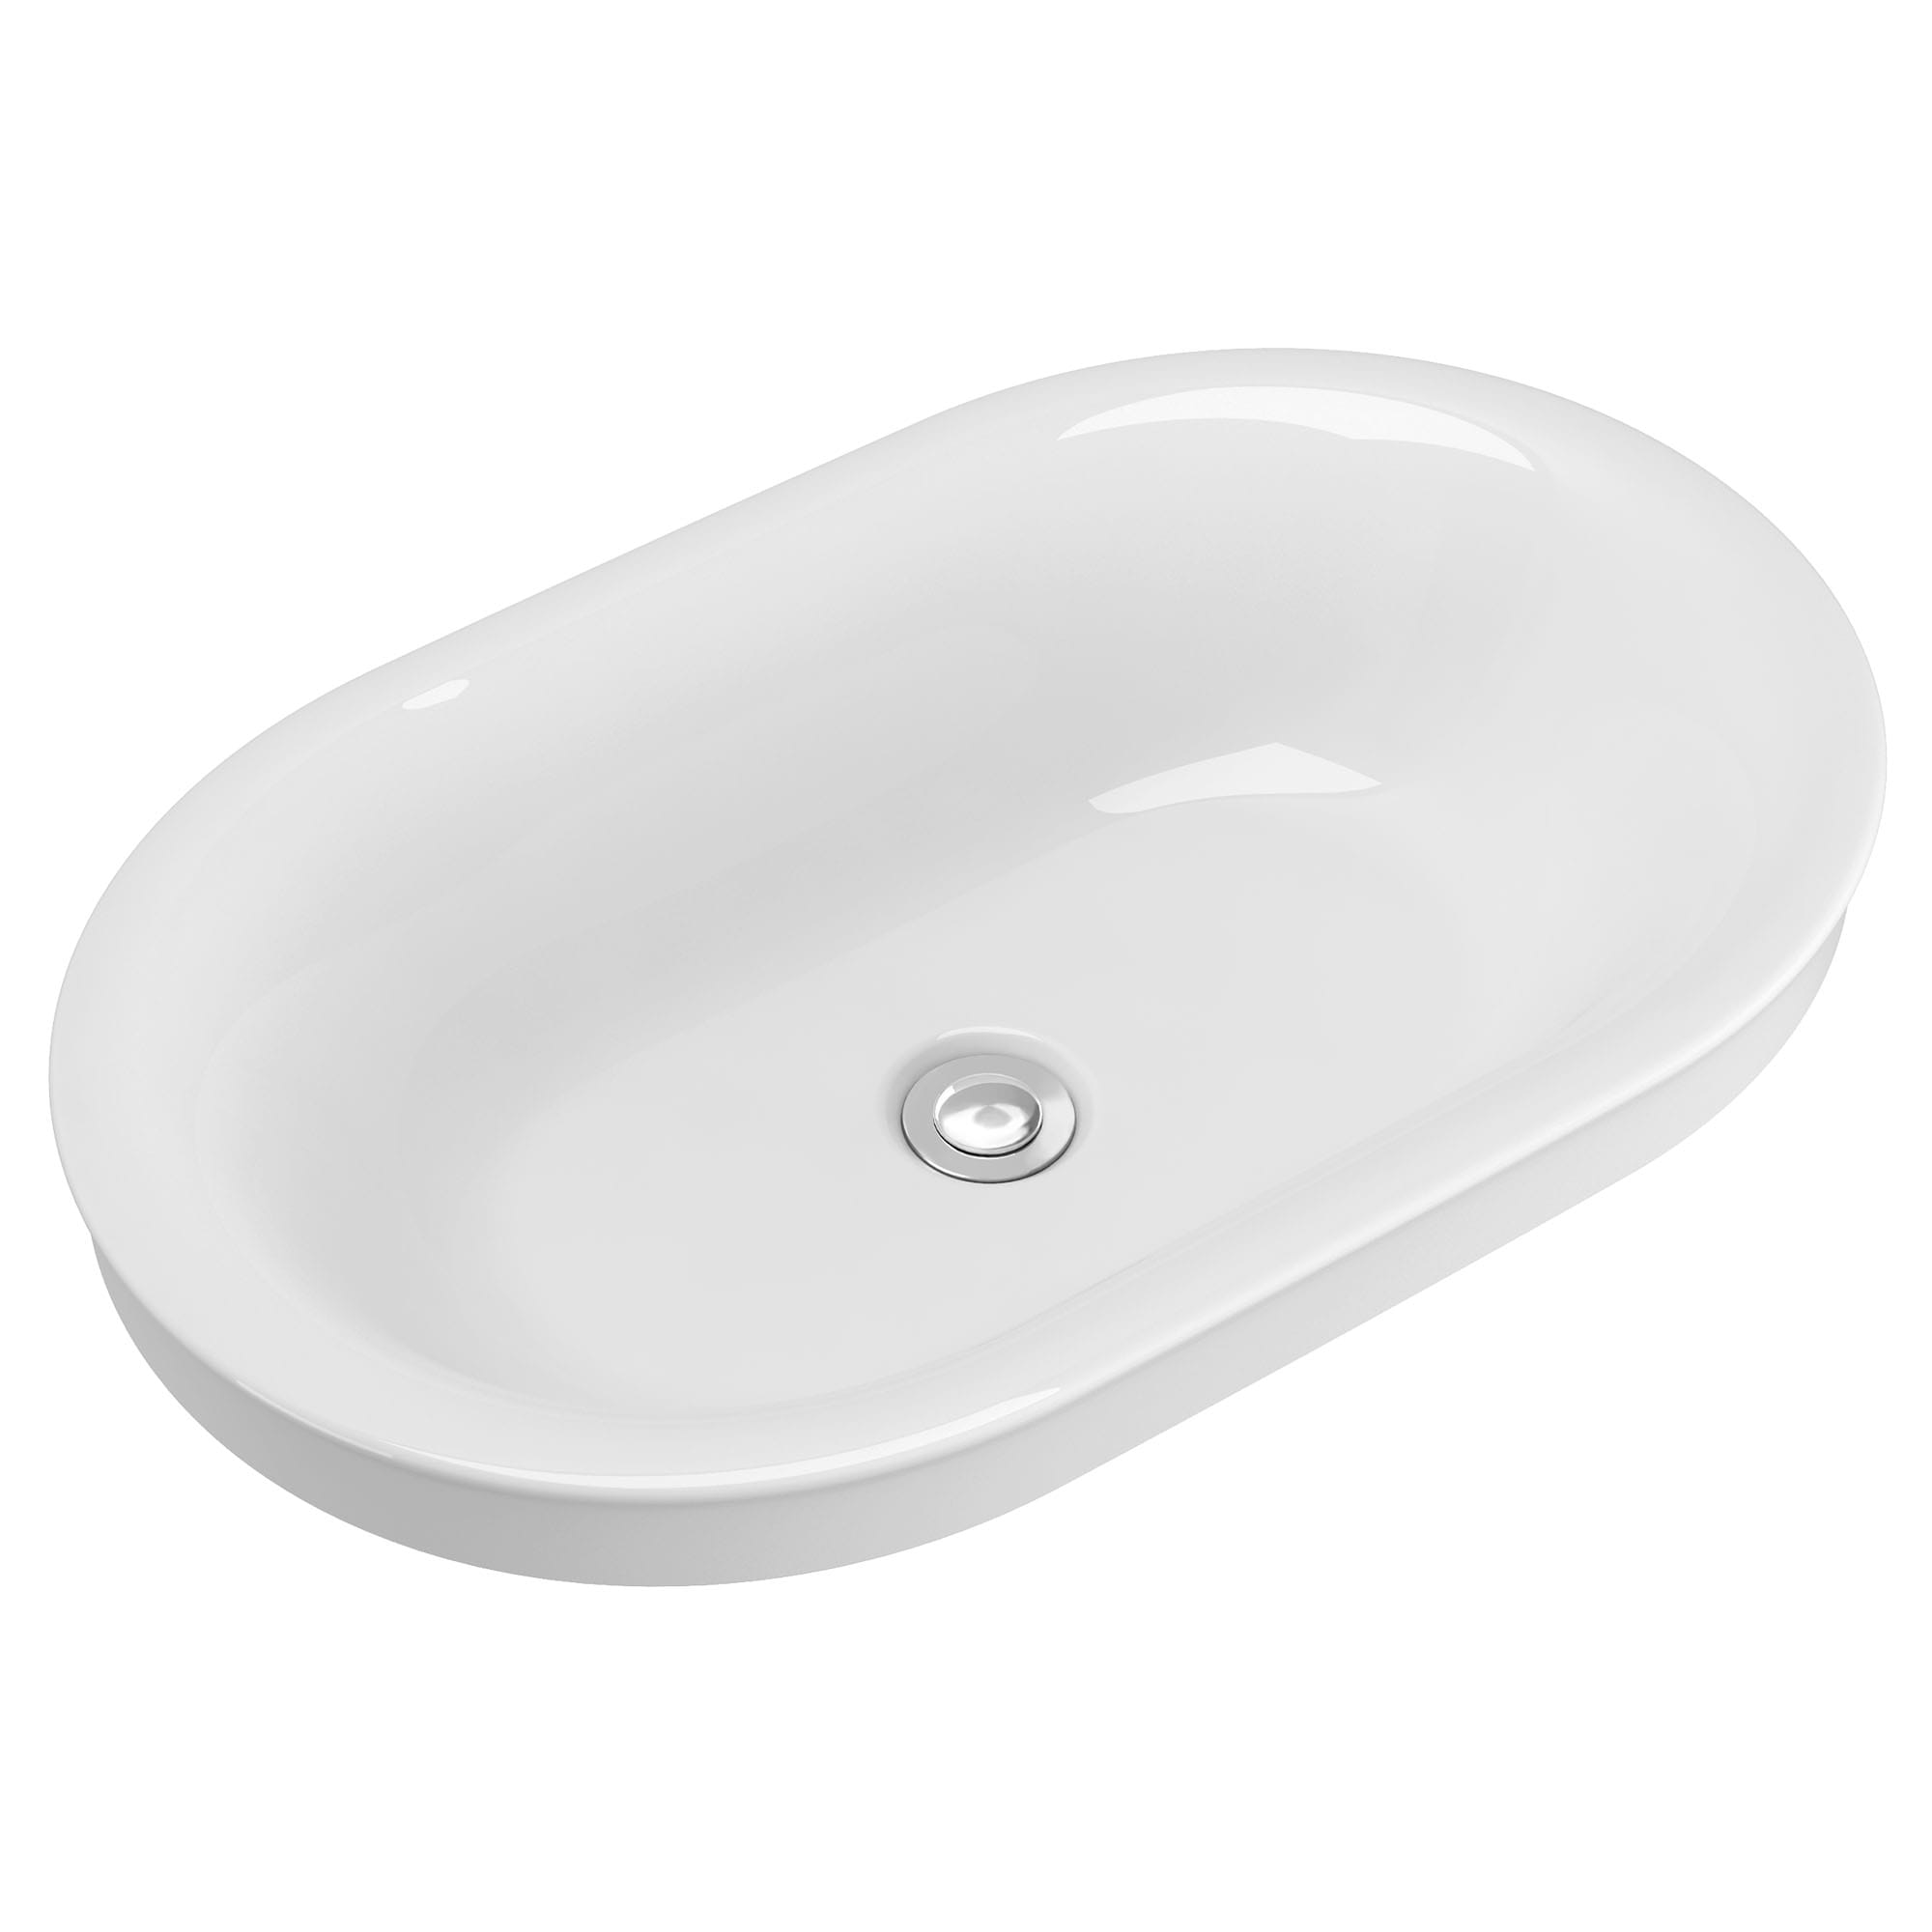 Studio™ S Above Counter Oval Sink